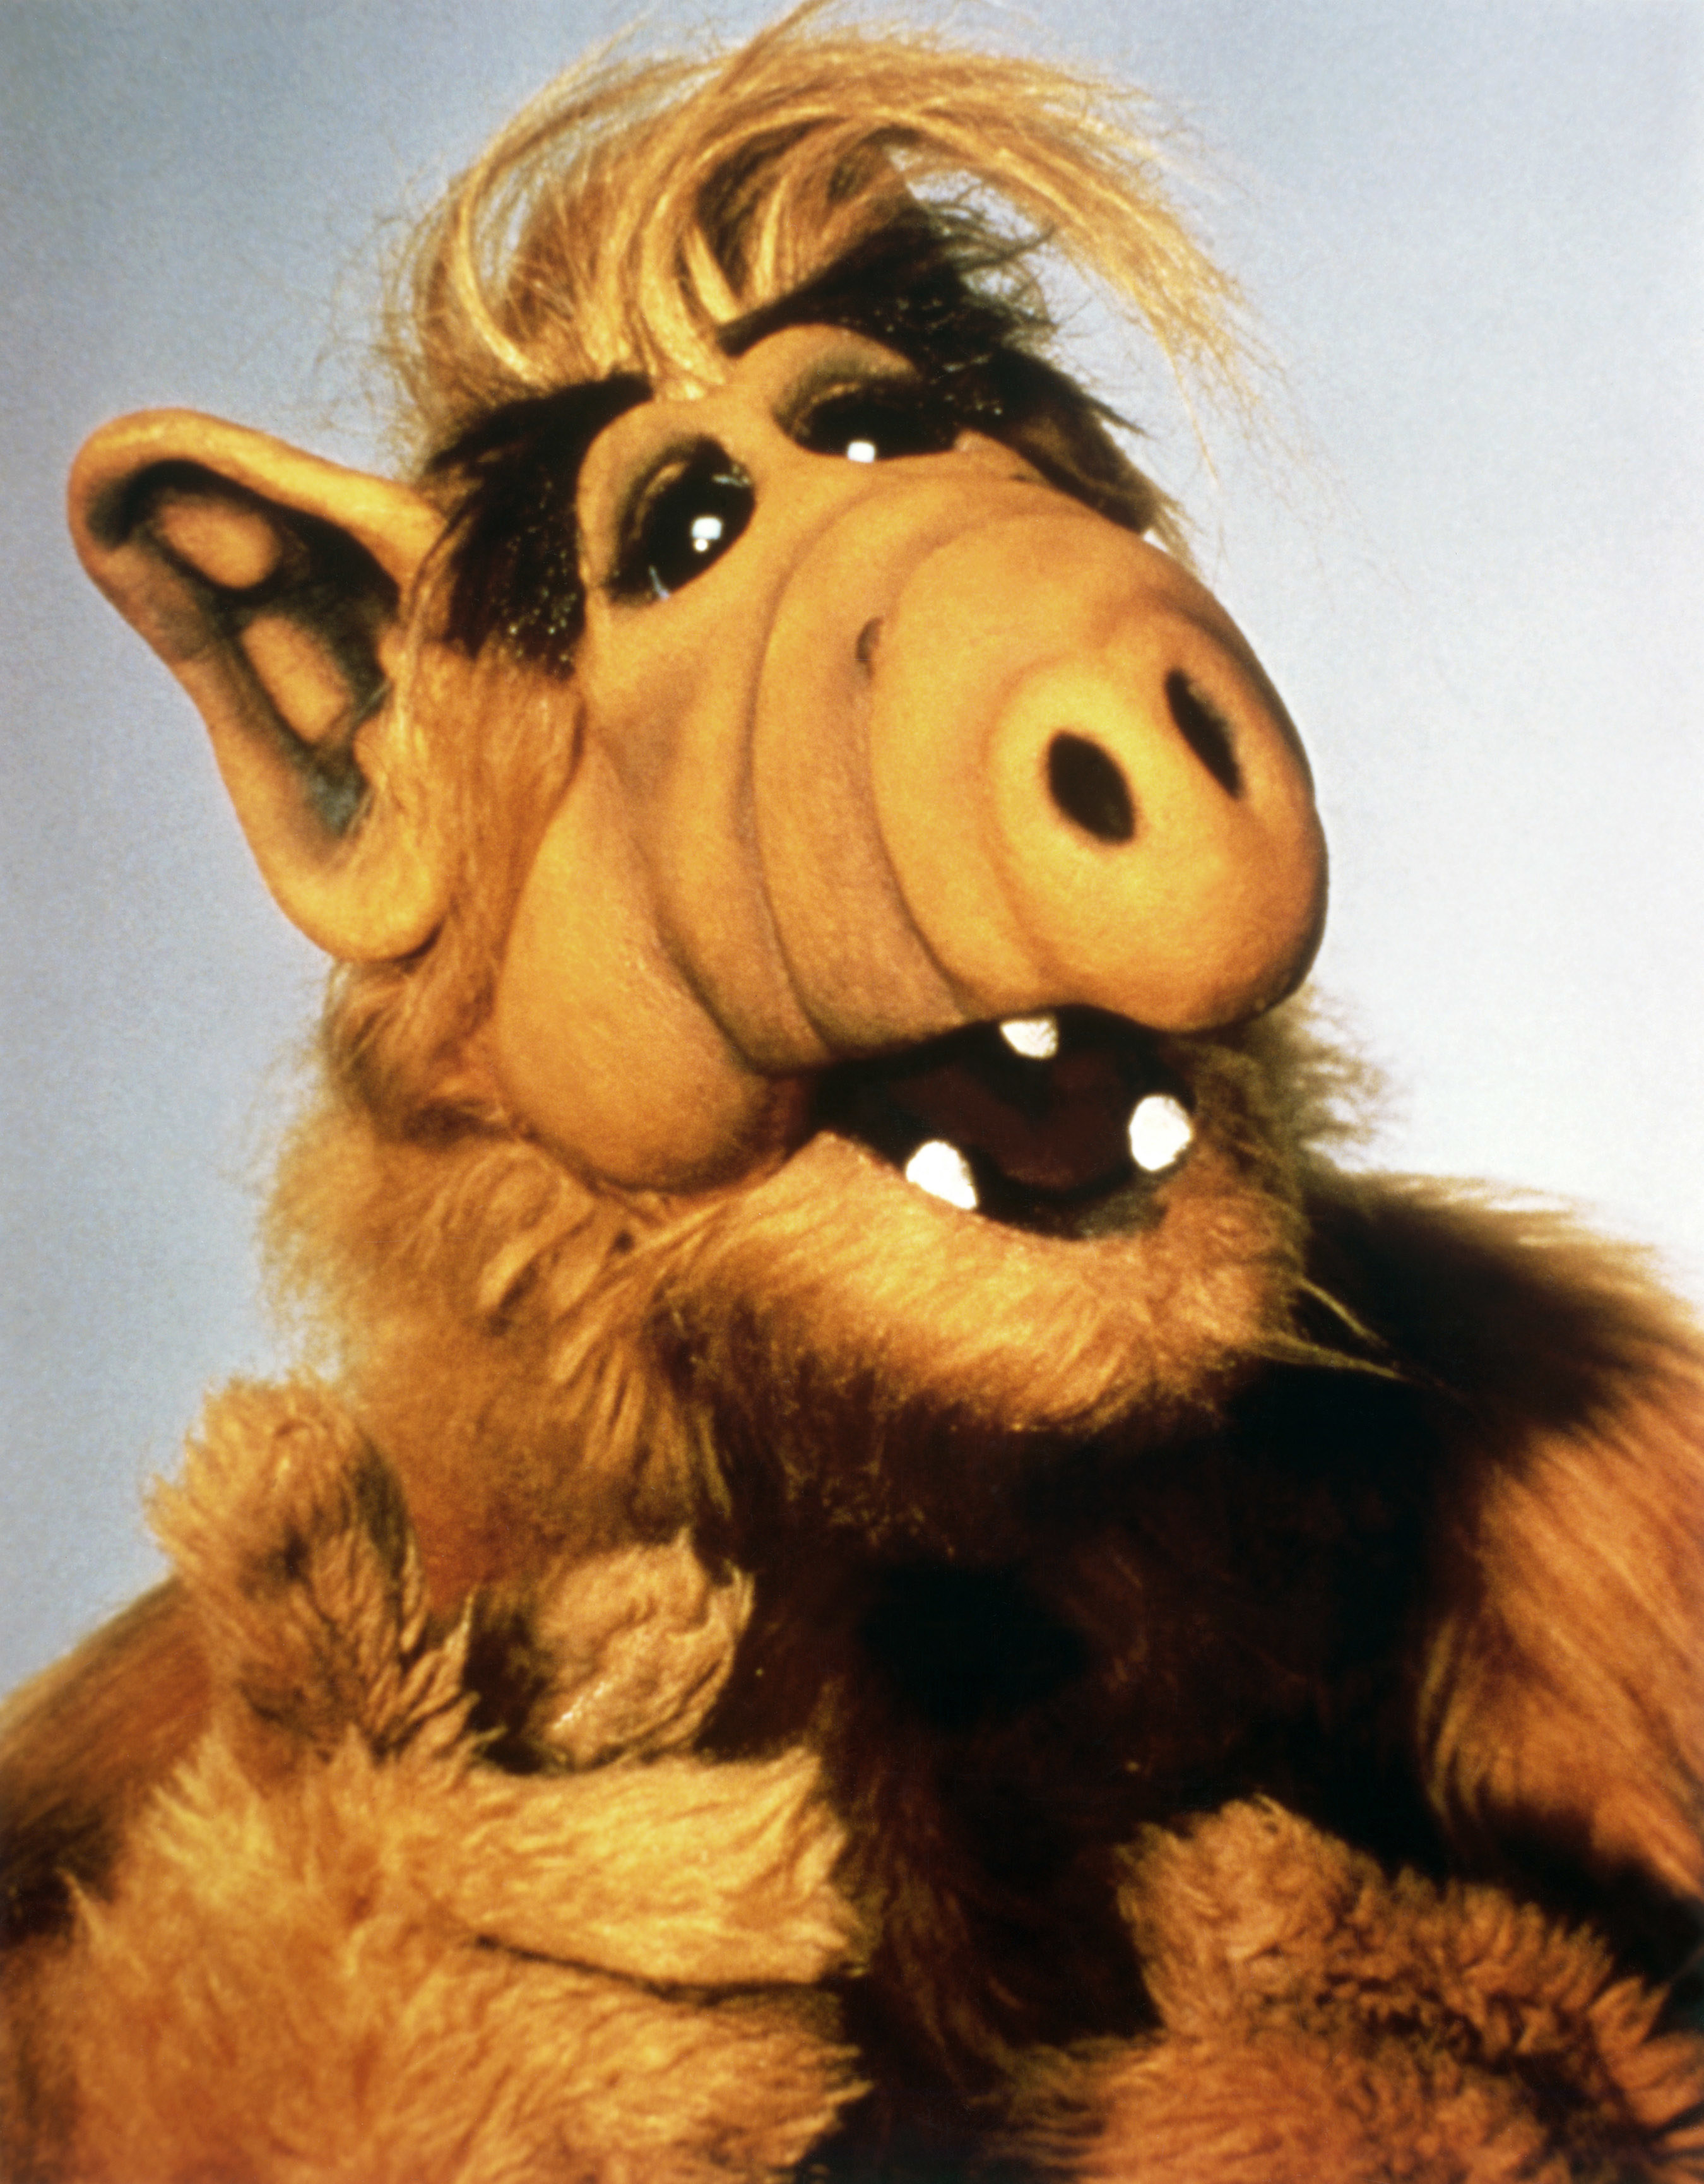 Photo of Alf pointing